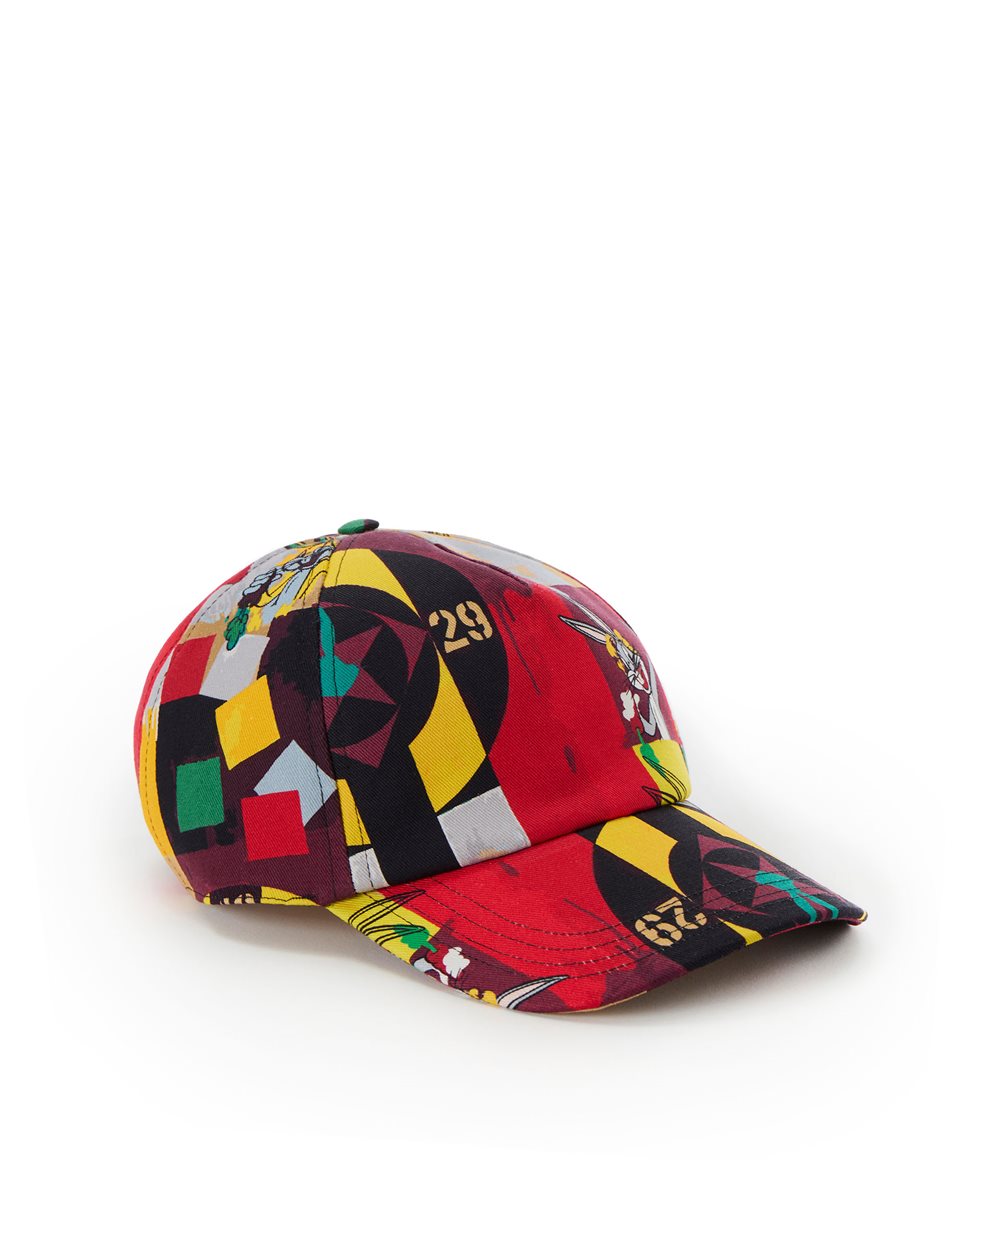 Baseball cap with cartoon graphics and logo - GIFT GUIDE  | Iceberg - Official Website